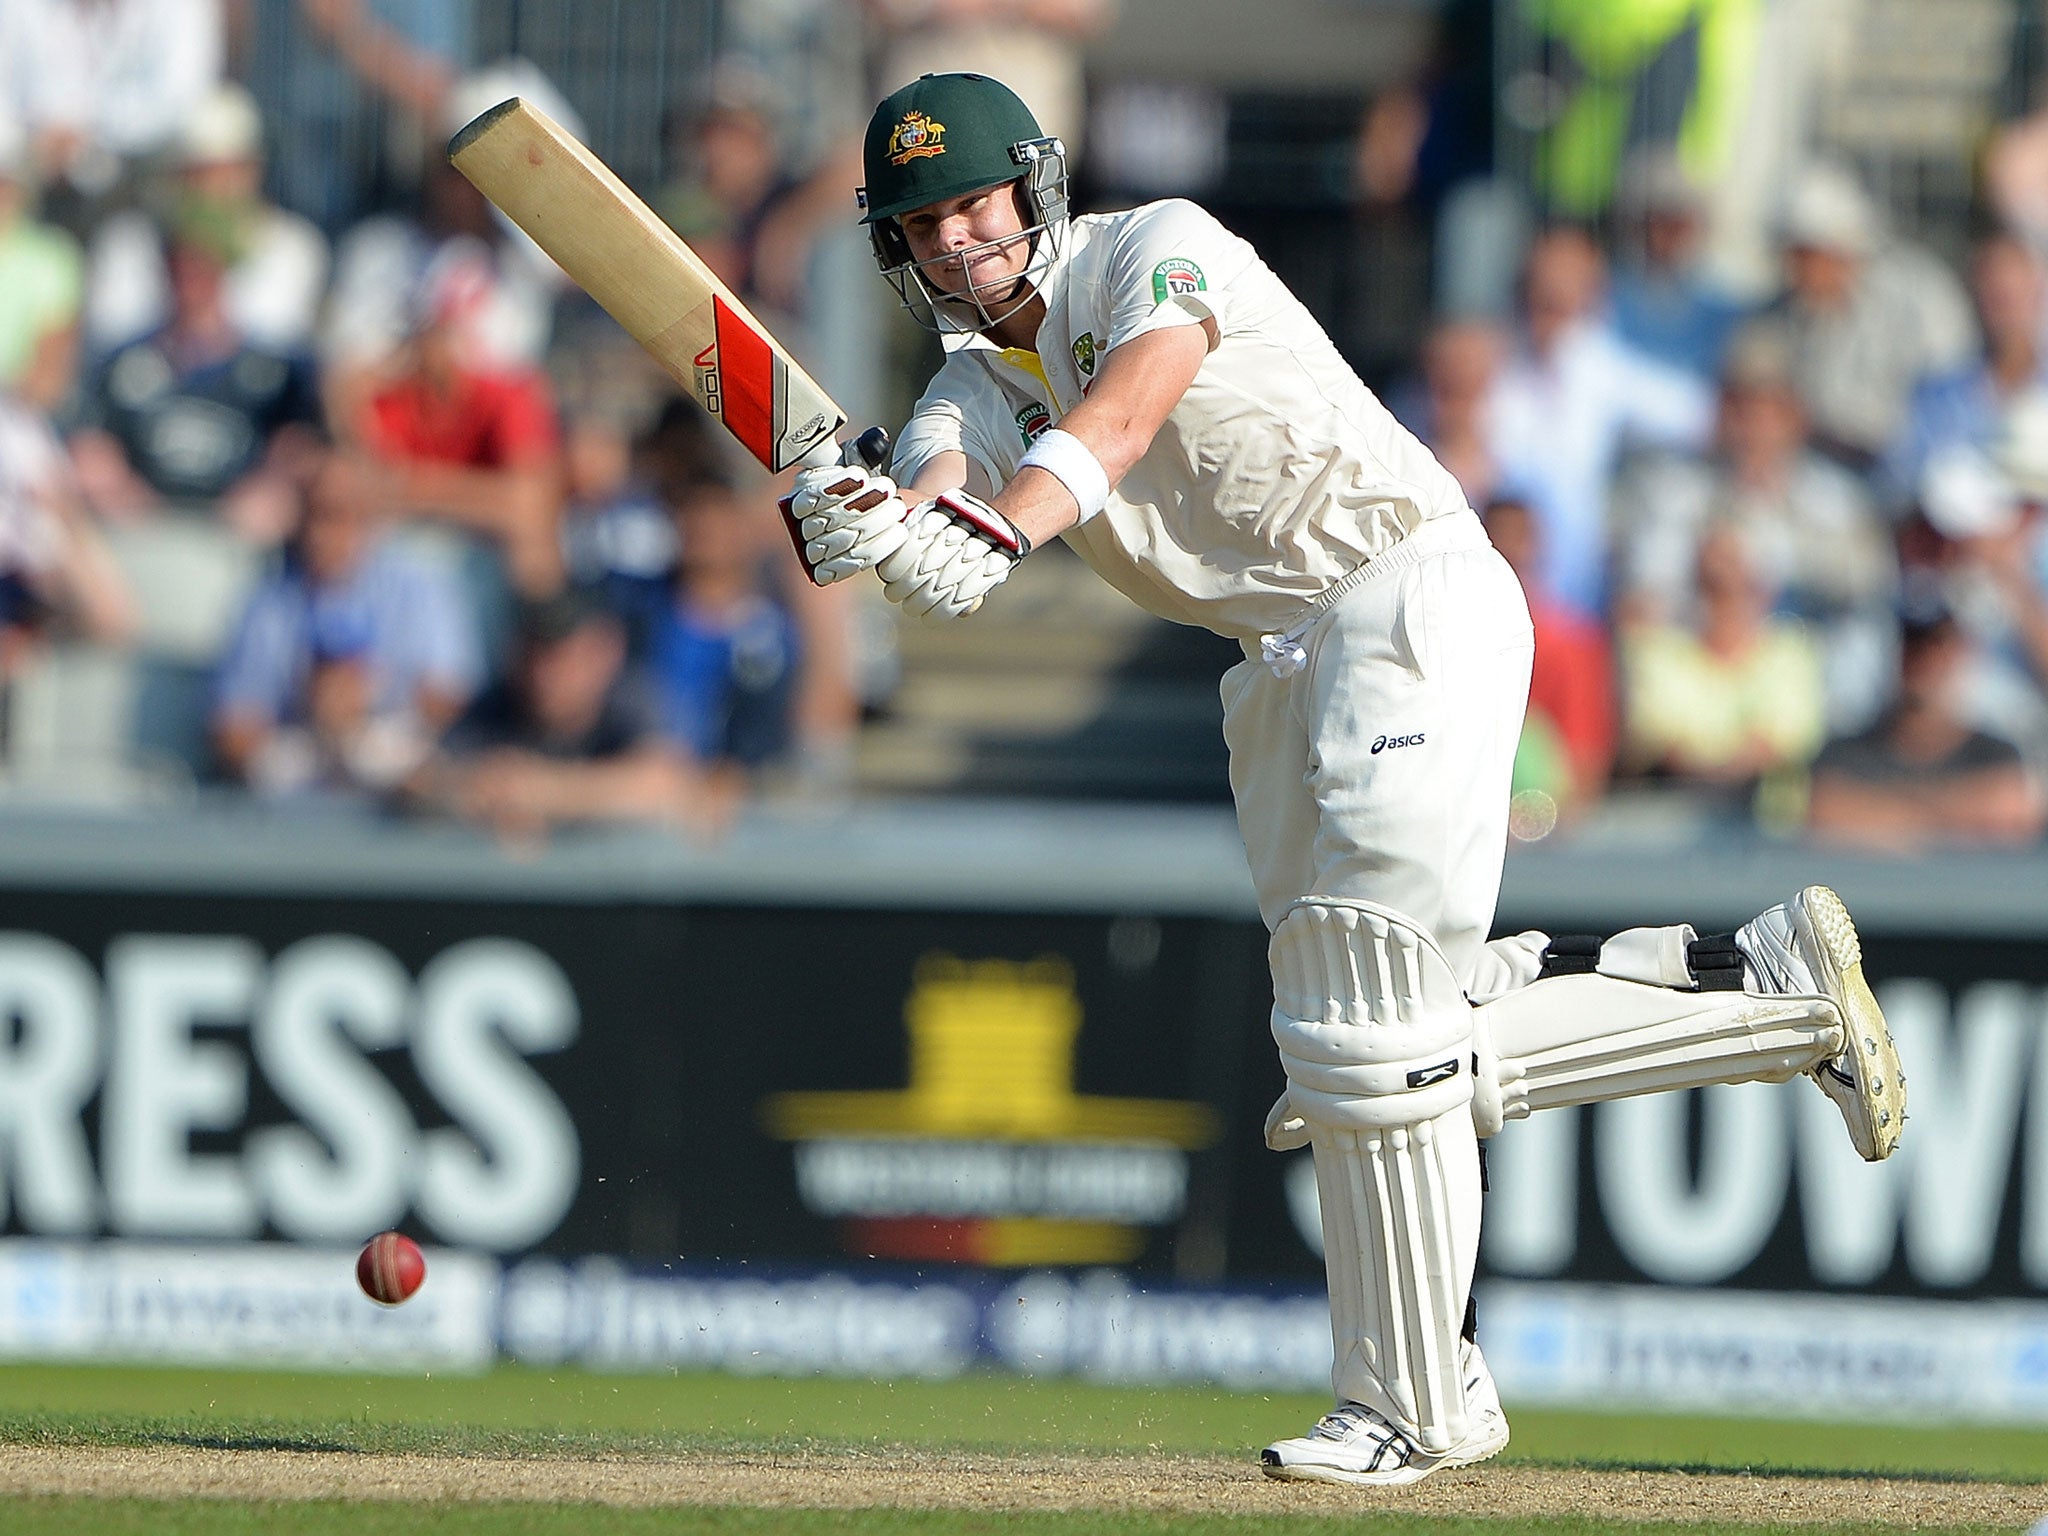 Steve Smith – 8 Easily Australia’s most improved player over recent years, Smith played his part in an excellent partnership with Clarke in Australia’s first innnings, scoring 89. Was unlucky to be run out by his captain when going well in the second innings.